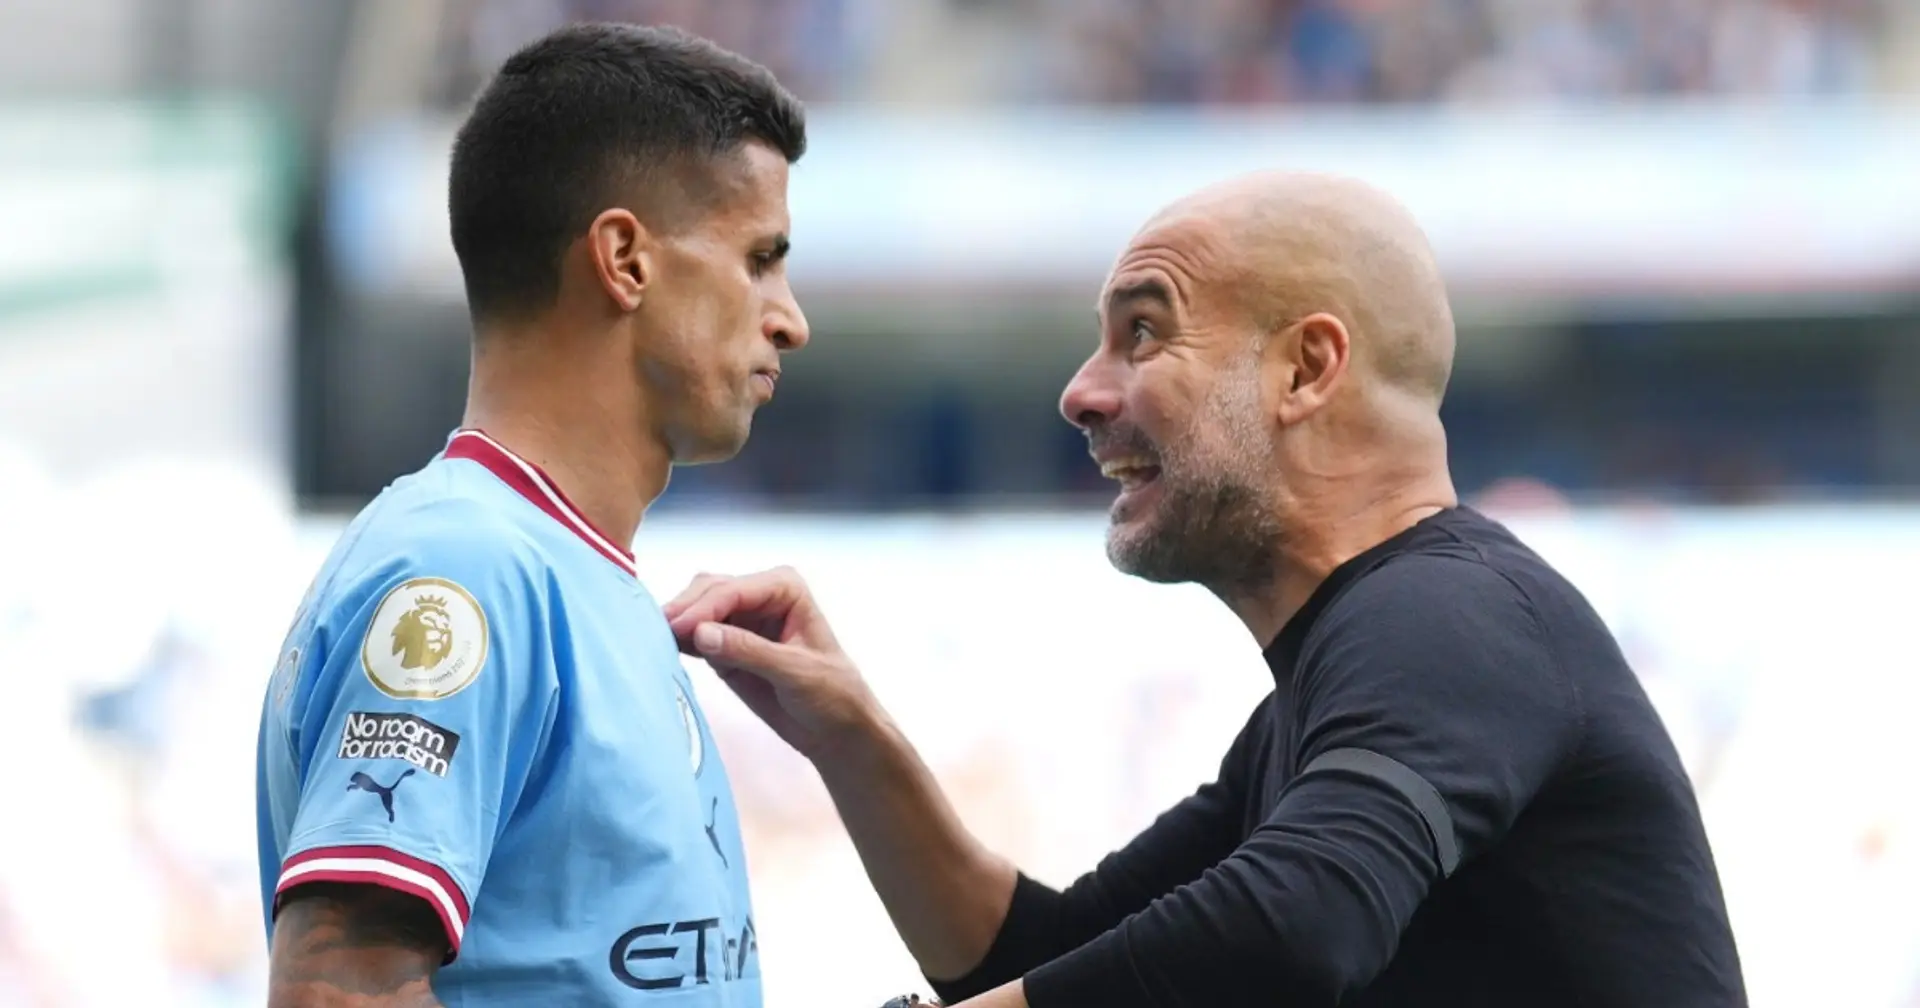 'I had things I didn't agree on': Joao Cancelo opens up on the breakdown in relationship with Pep Guardiola